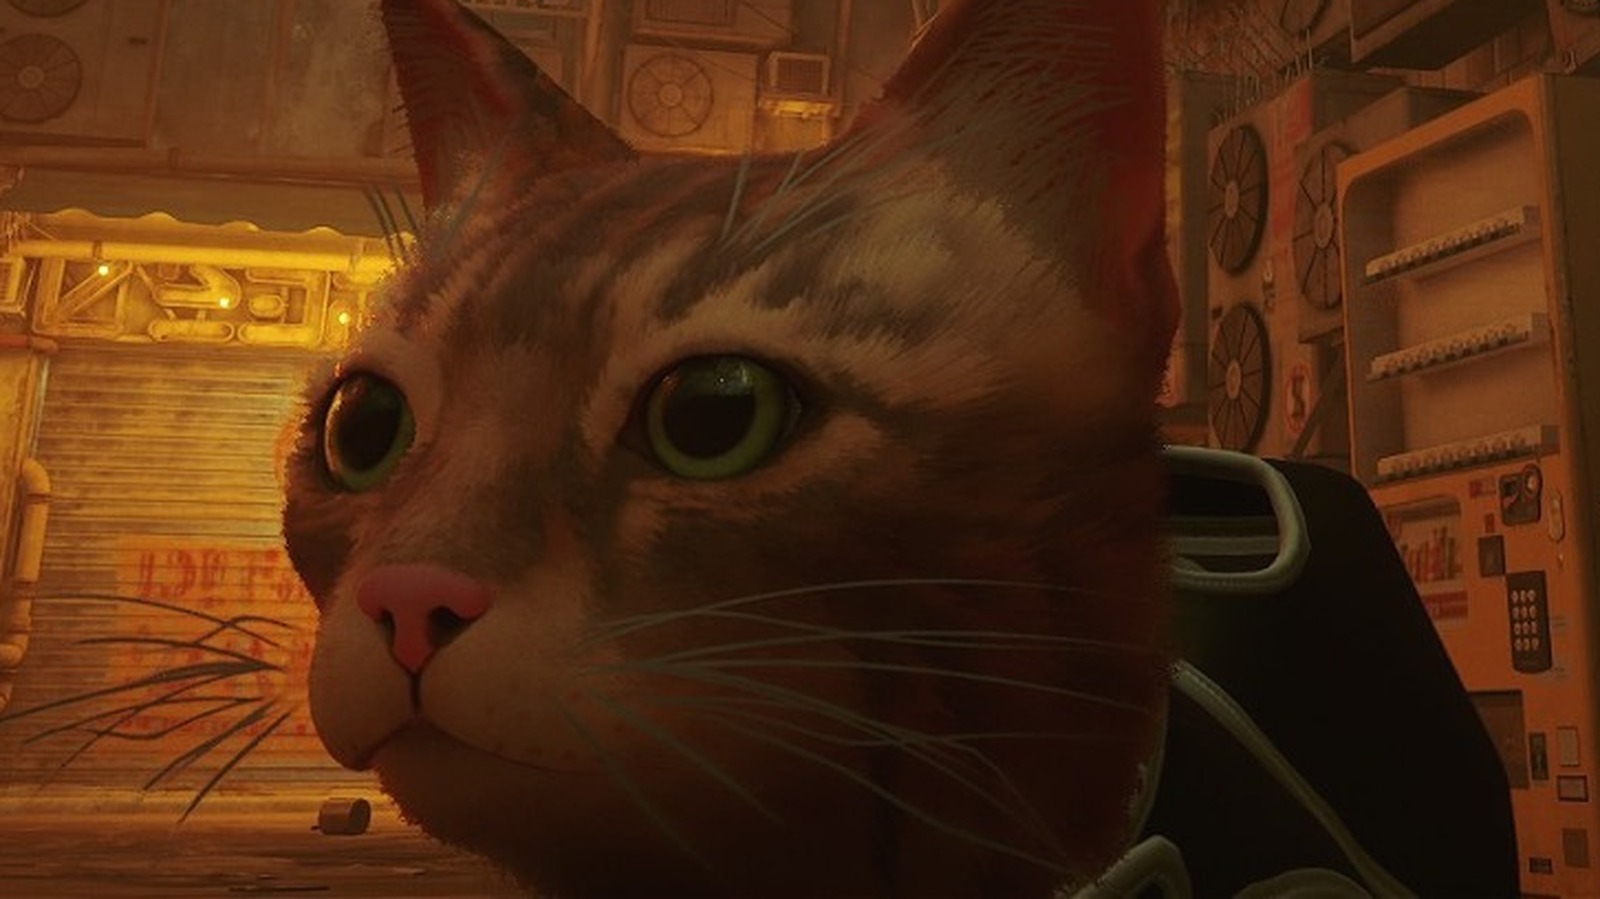 Stray' modders are adding their own cats into the game